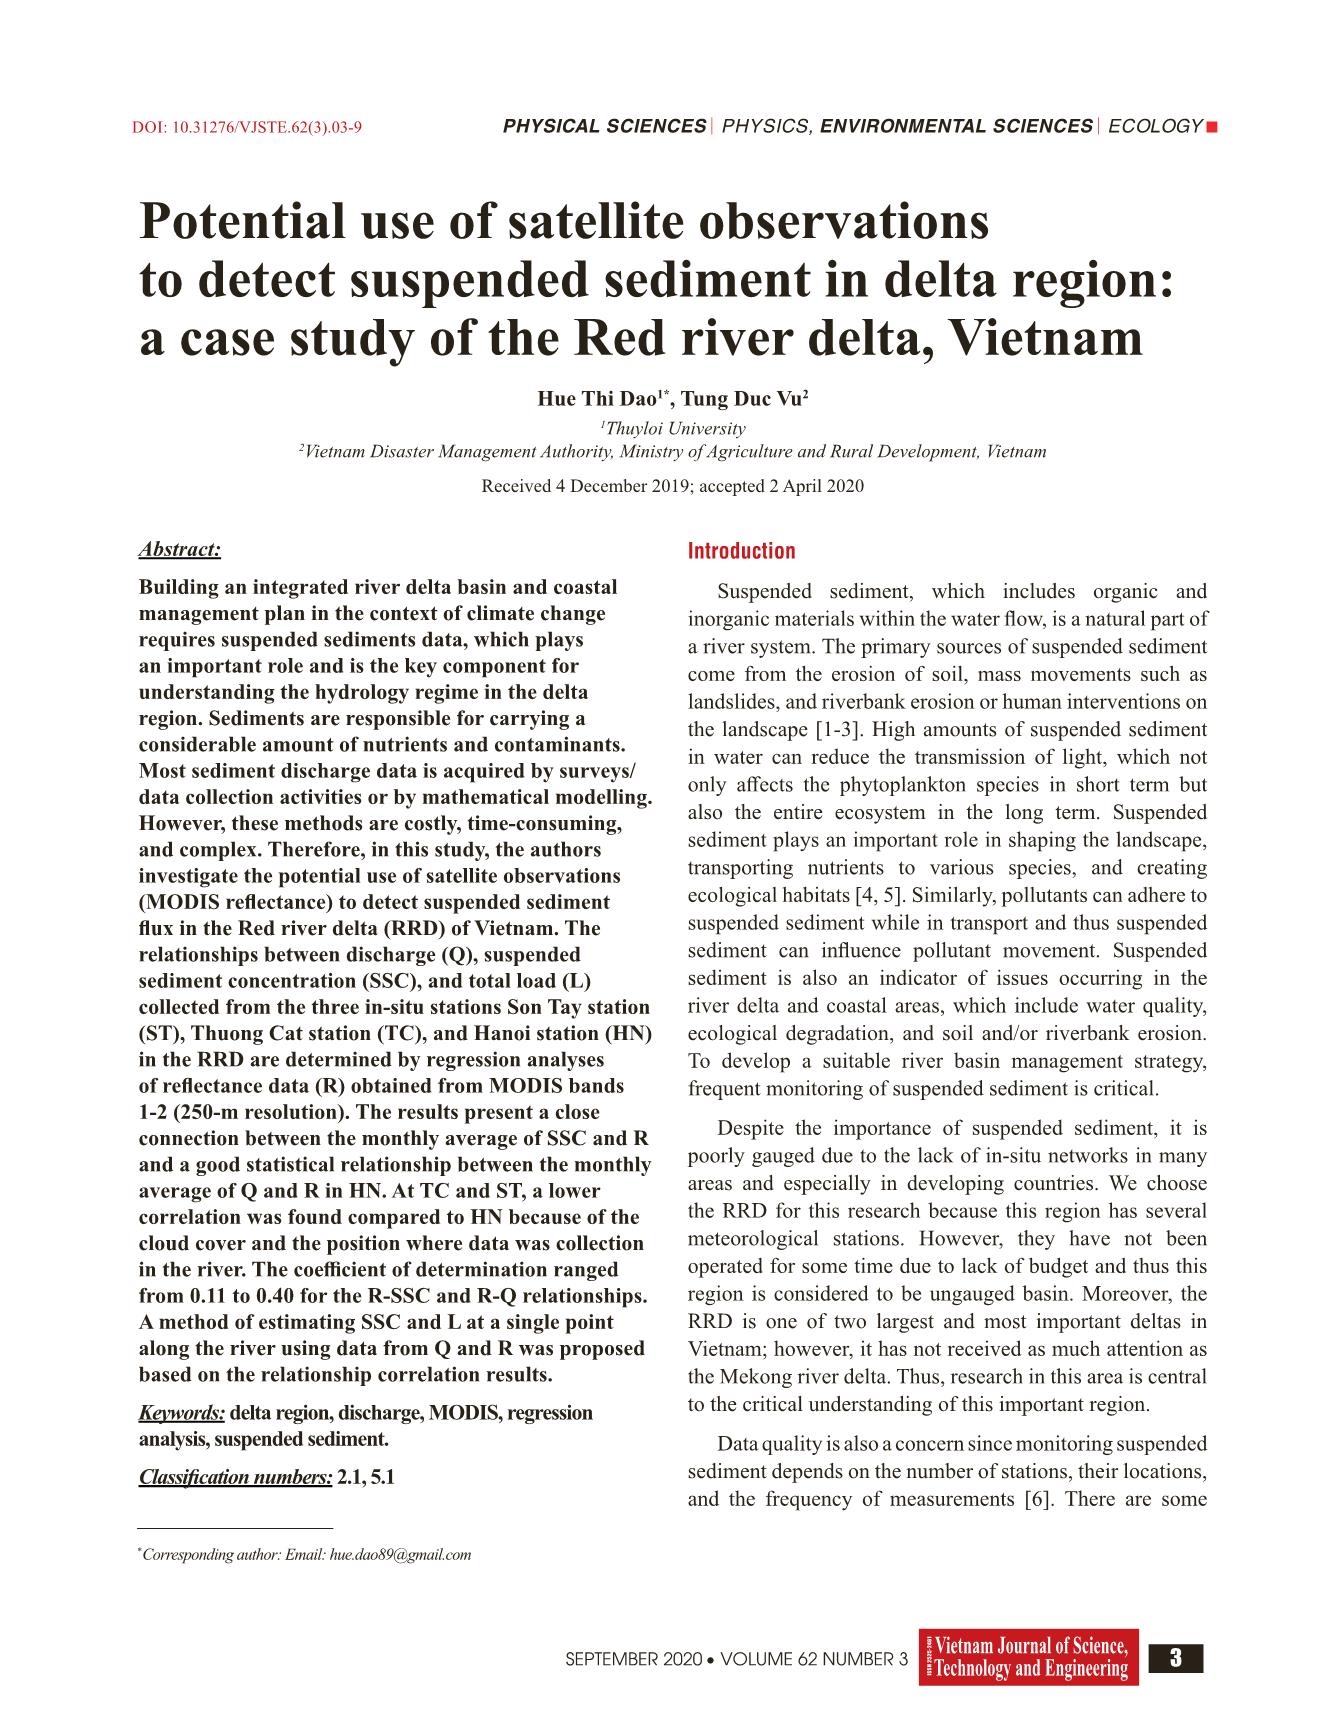 Potential use of satellite observations to detect suspended sediment in delta region: a case study of the Red river delta, Vietnam trang 1